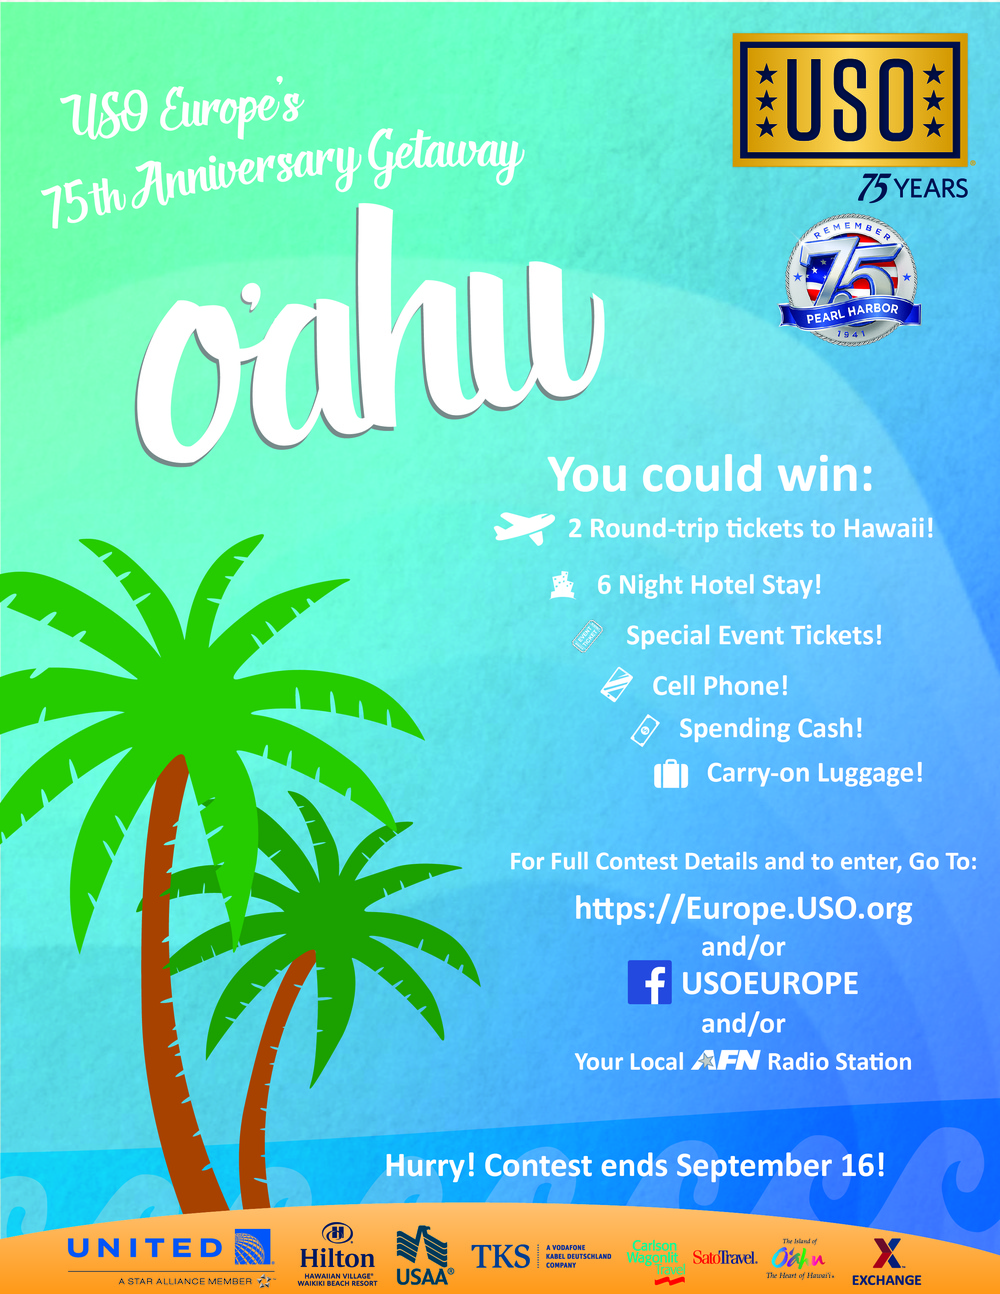 USO Europes 75th Anniversary Giveaway E-Flyer